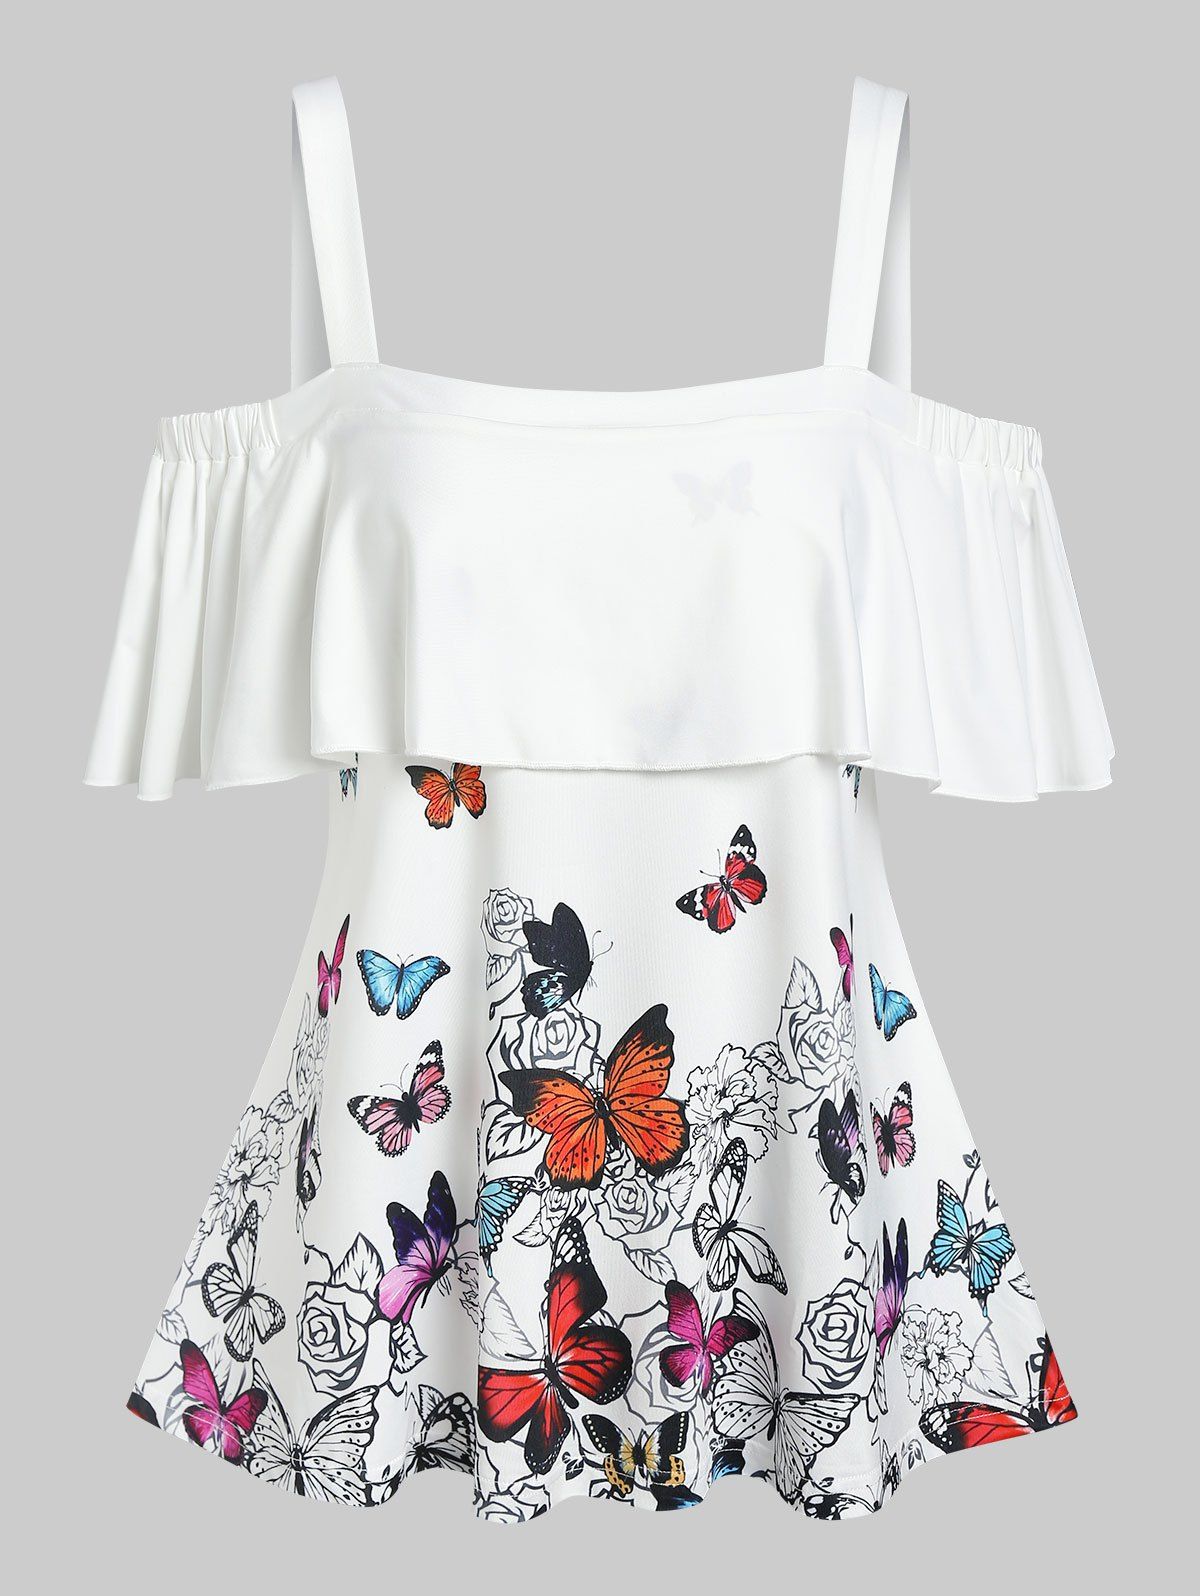 Ruffled Cold Shoulder Butterfly Print Tee - WHITE M